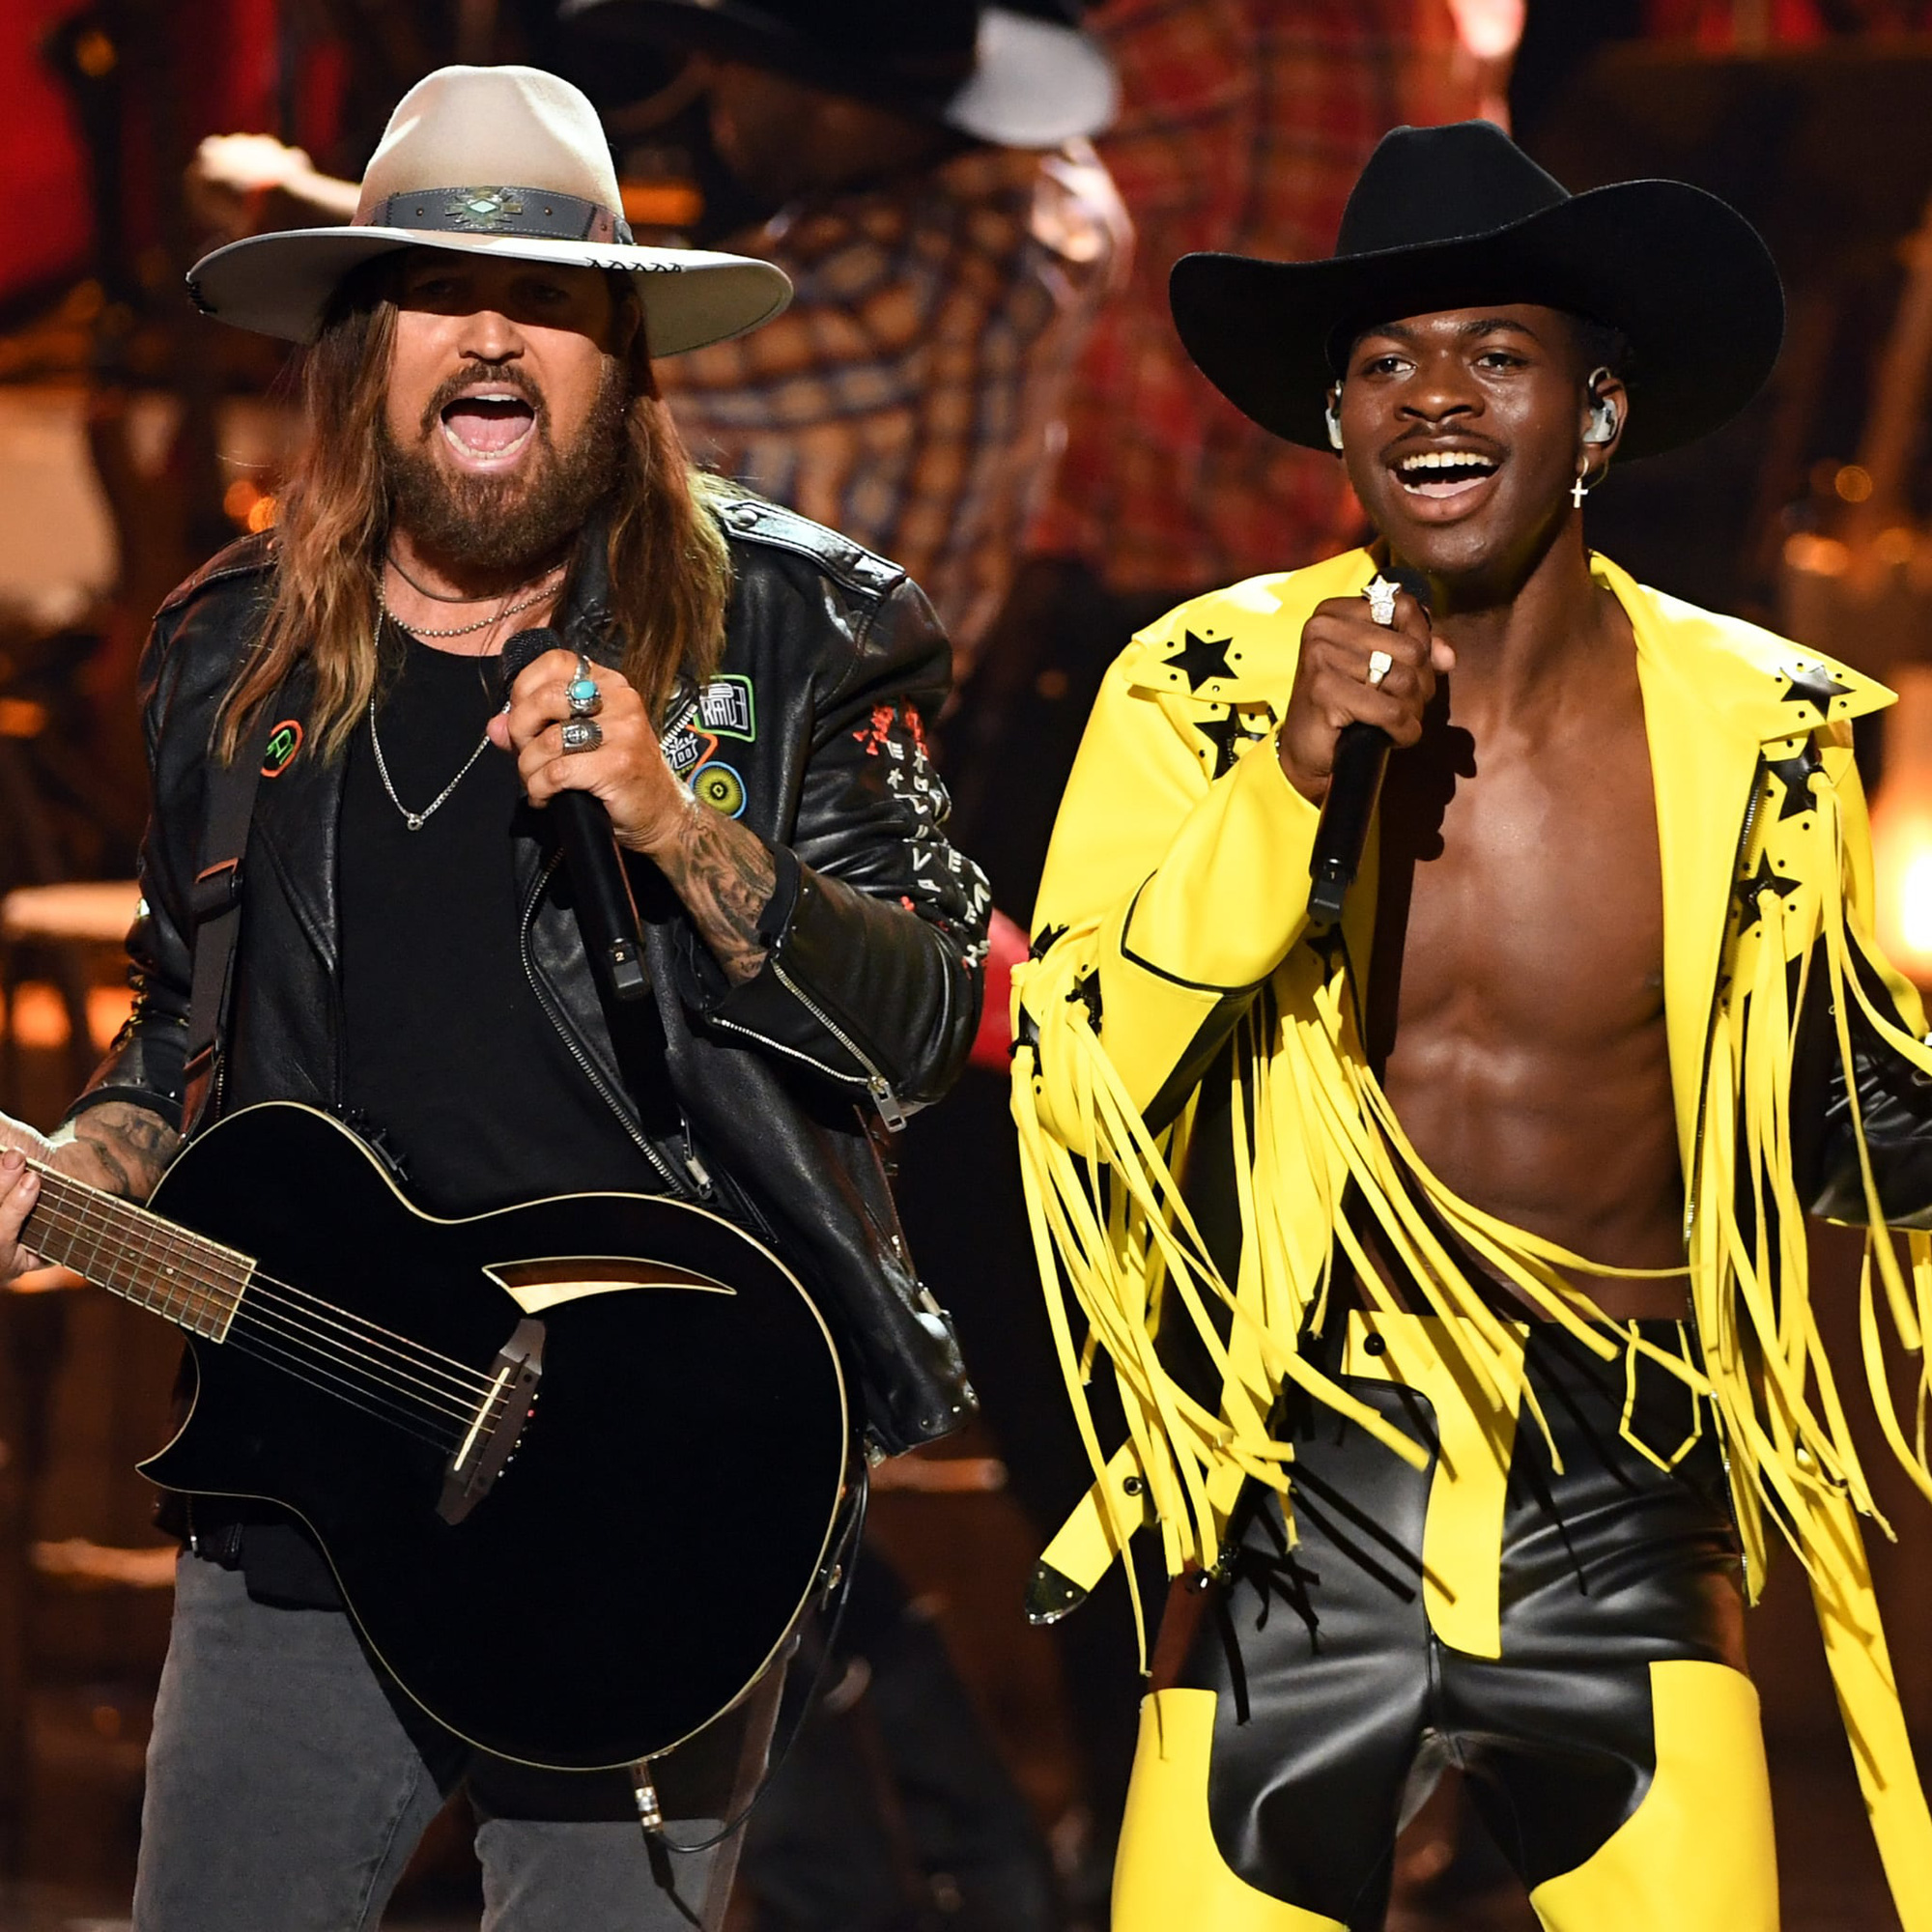 Billy cyrus old town. Billy ray Cyrus old Town Road. Lil nas x Billy ray Cyrus old.